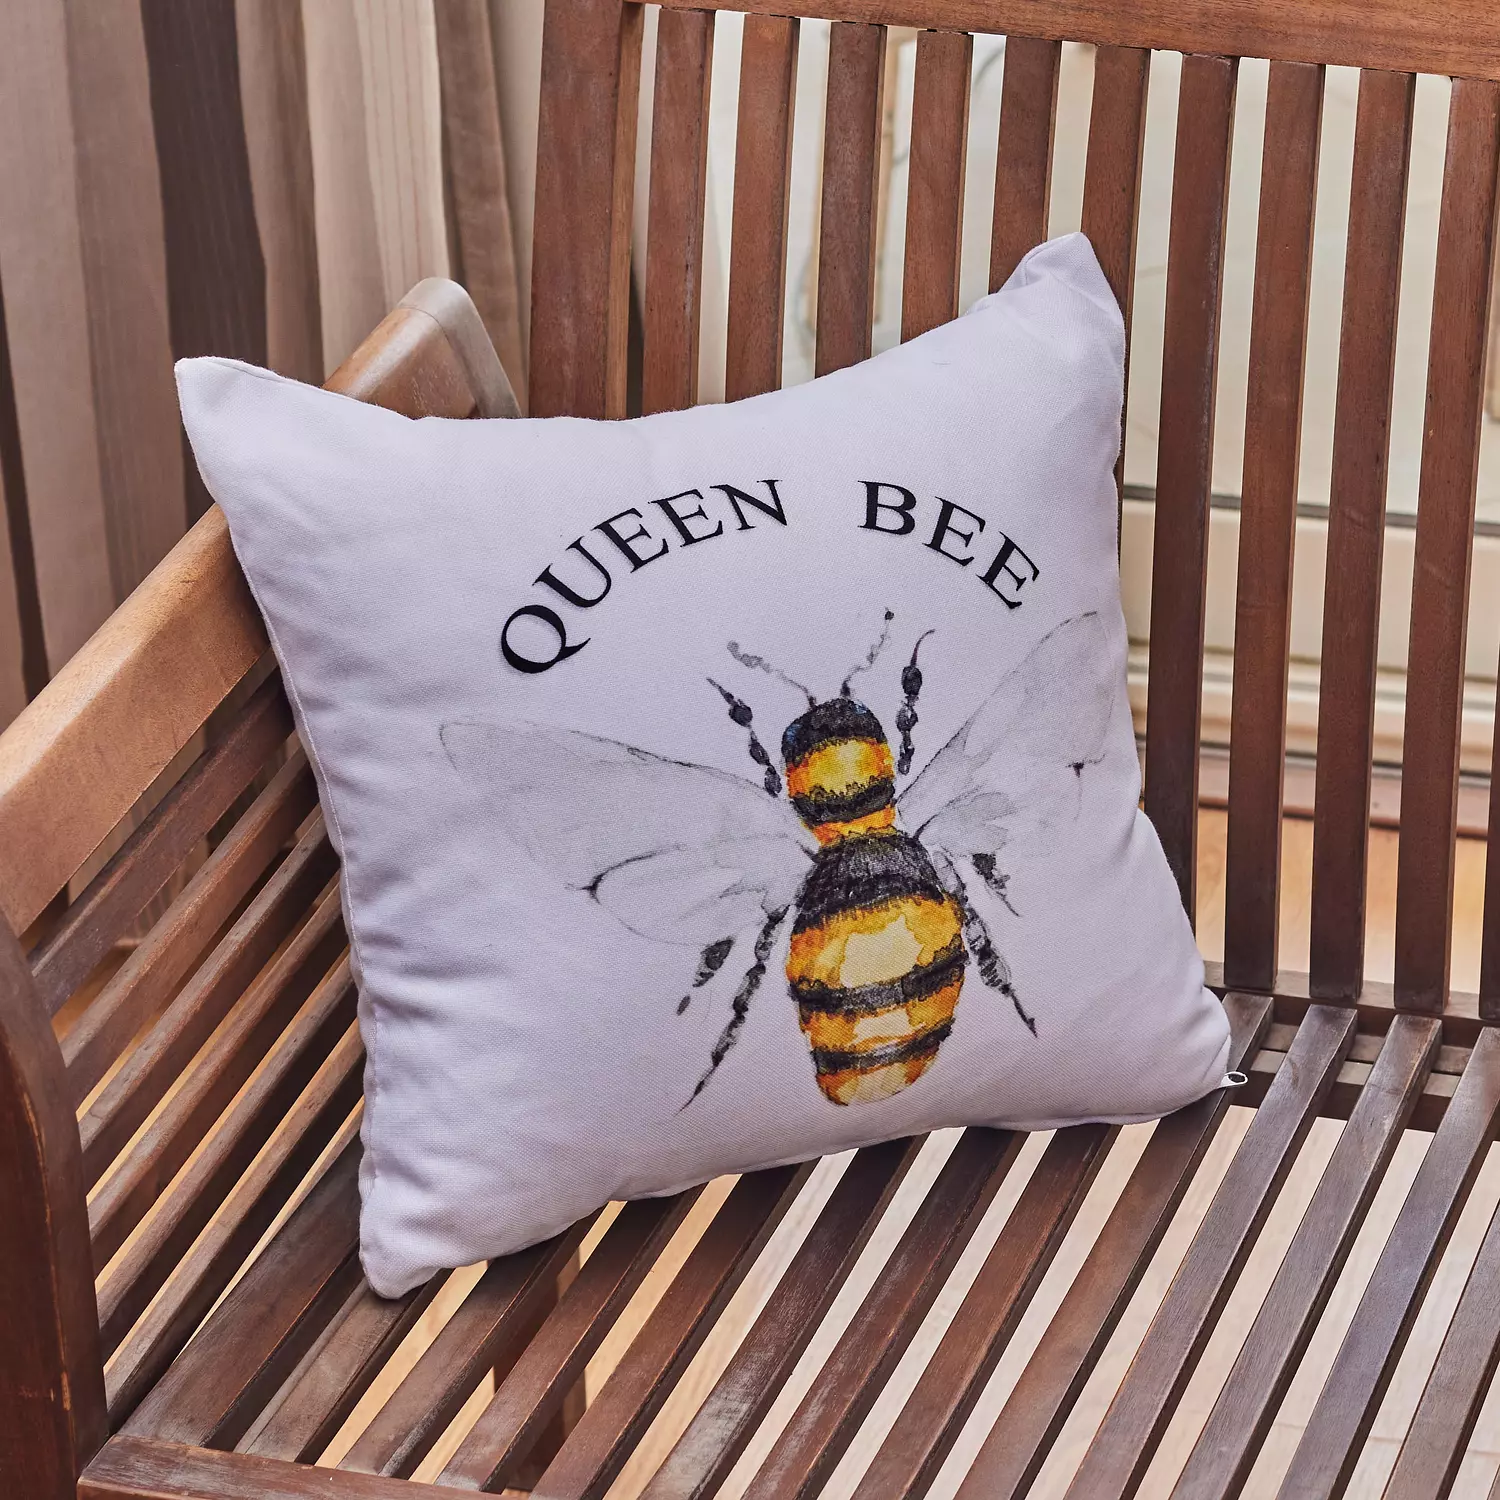 Queen B Cushion hover image